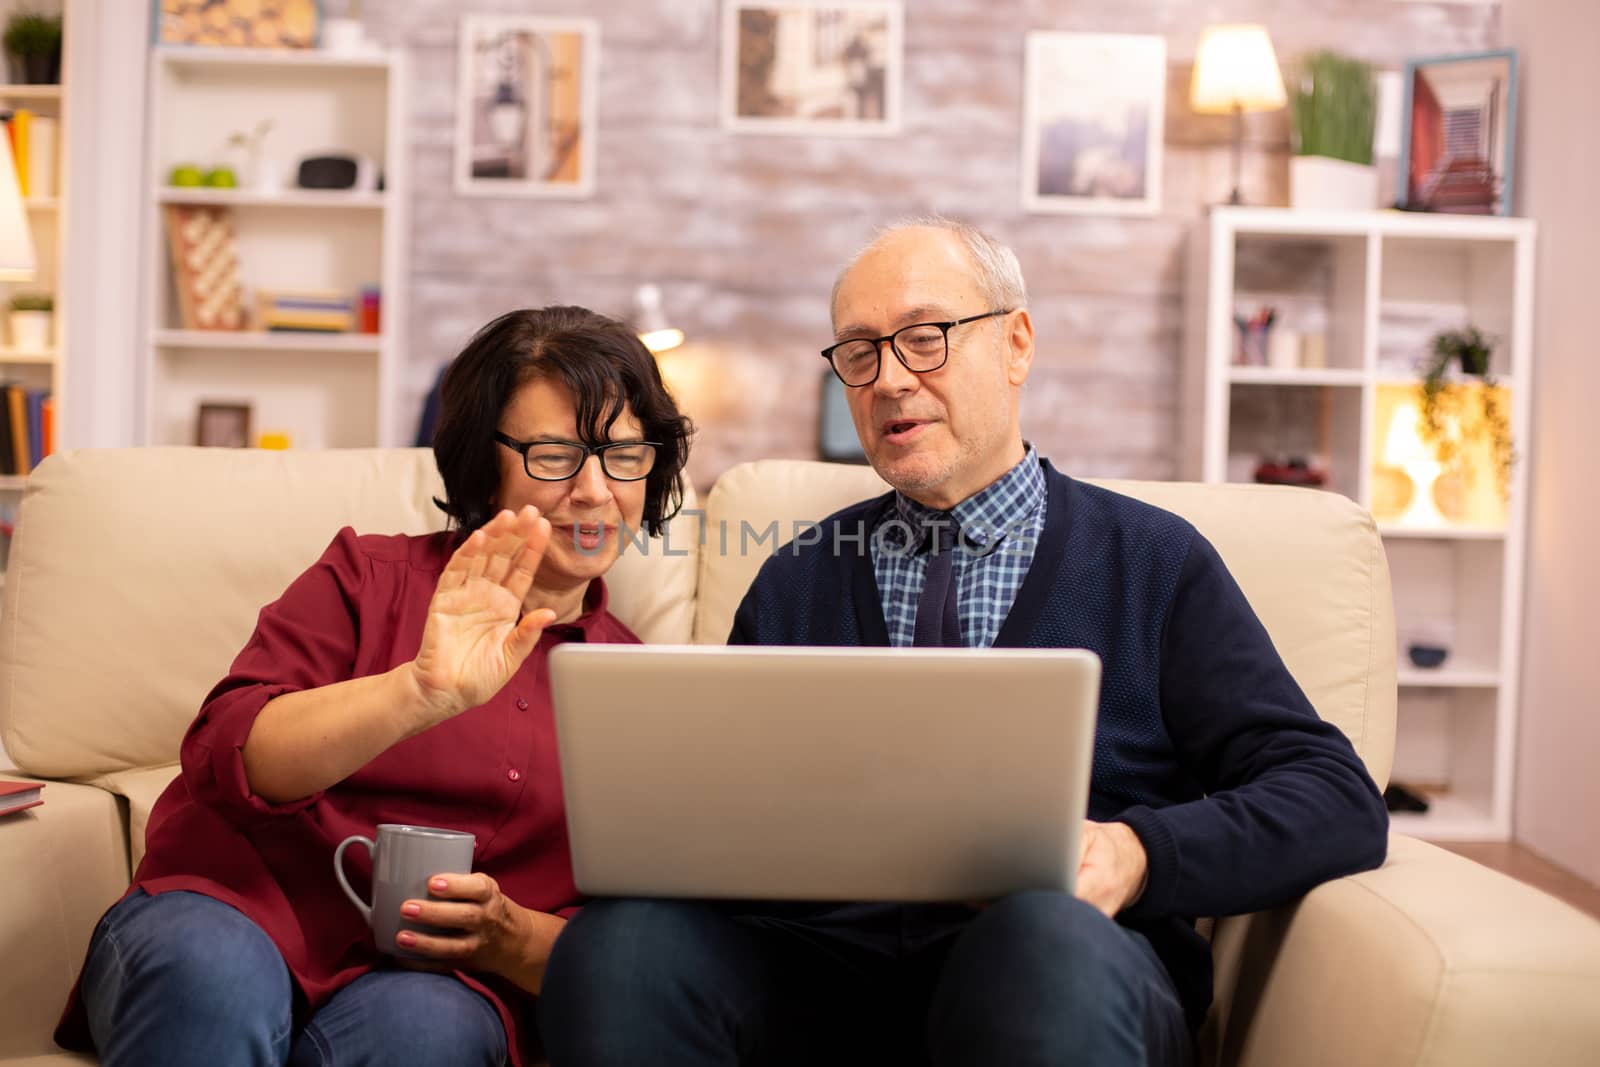 Elderly old couple using modern laptop to chat with their grandson. Grandmother and grandfather using modern technology